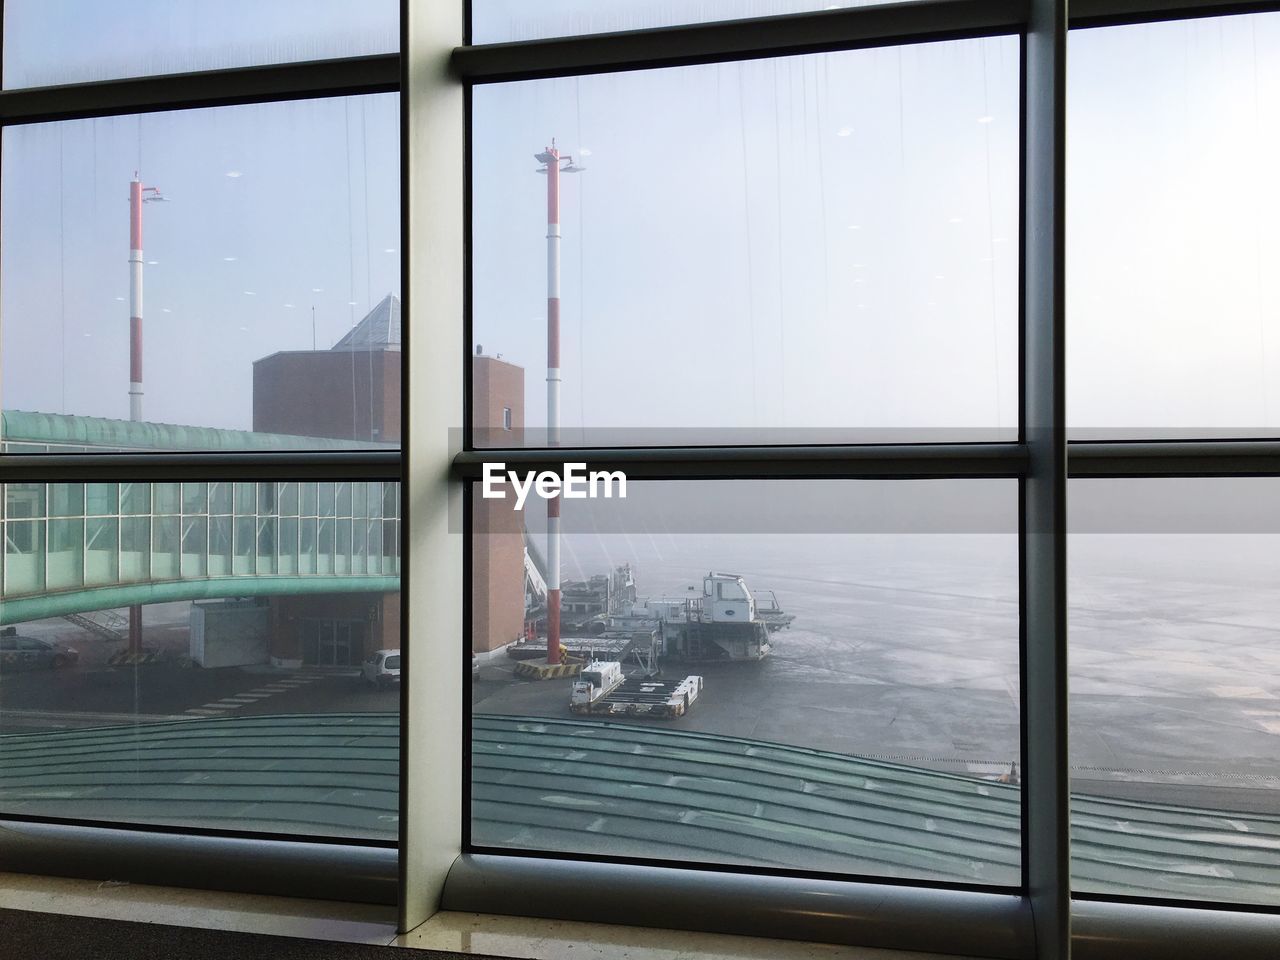 Airport runway seen through window during foggy weather